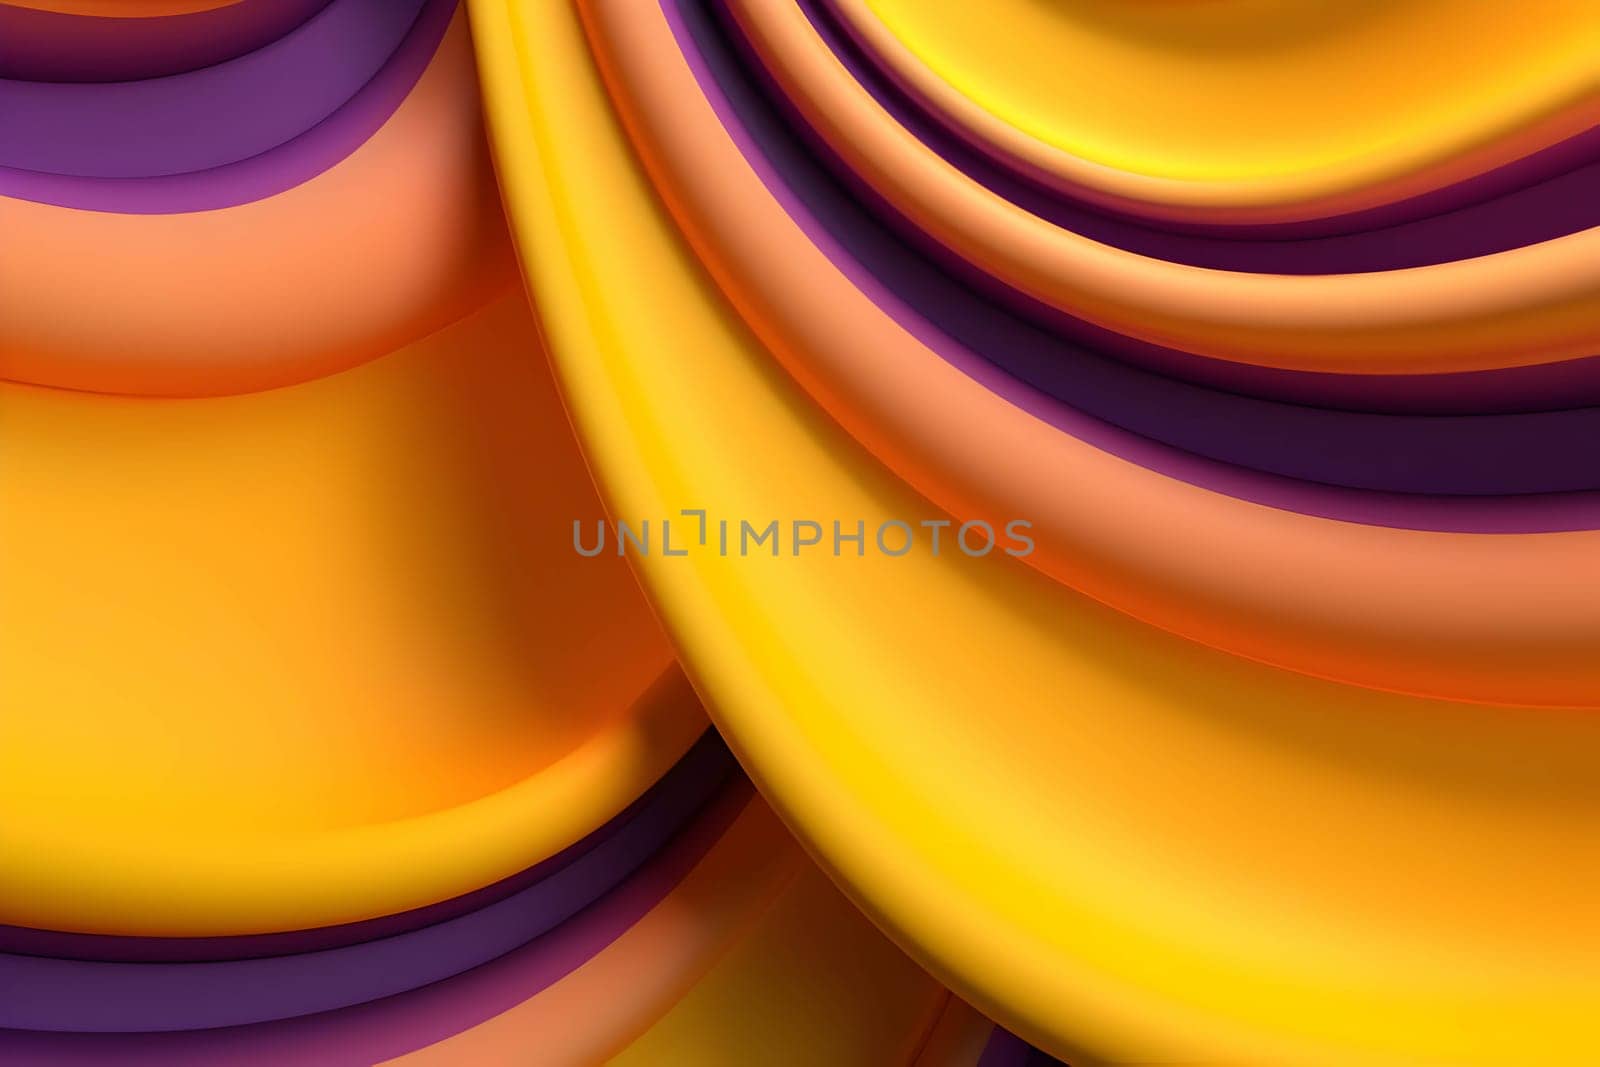 An abstract background with 3D waves and lines in purple and yellow, creating a visually captivating and dynamic design.